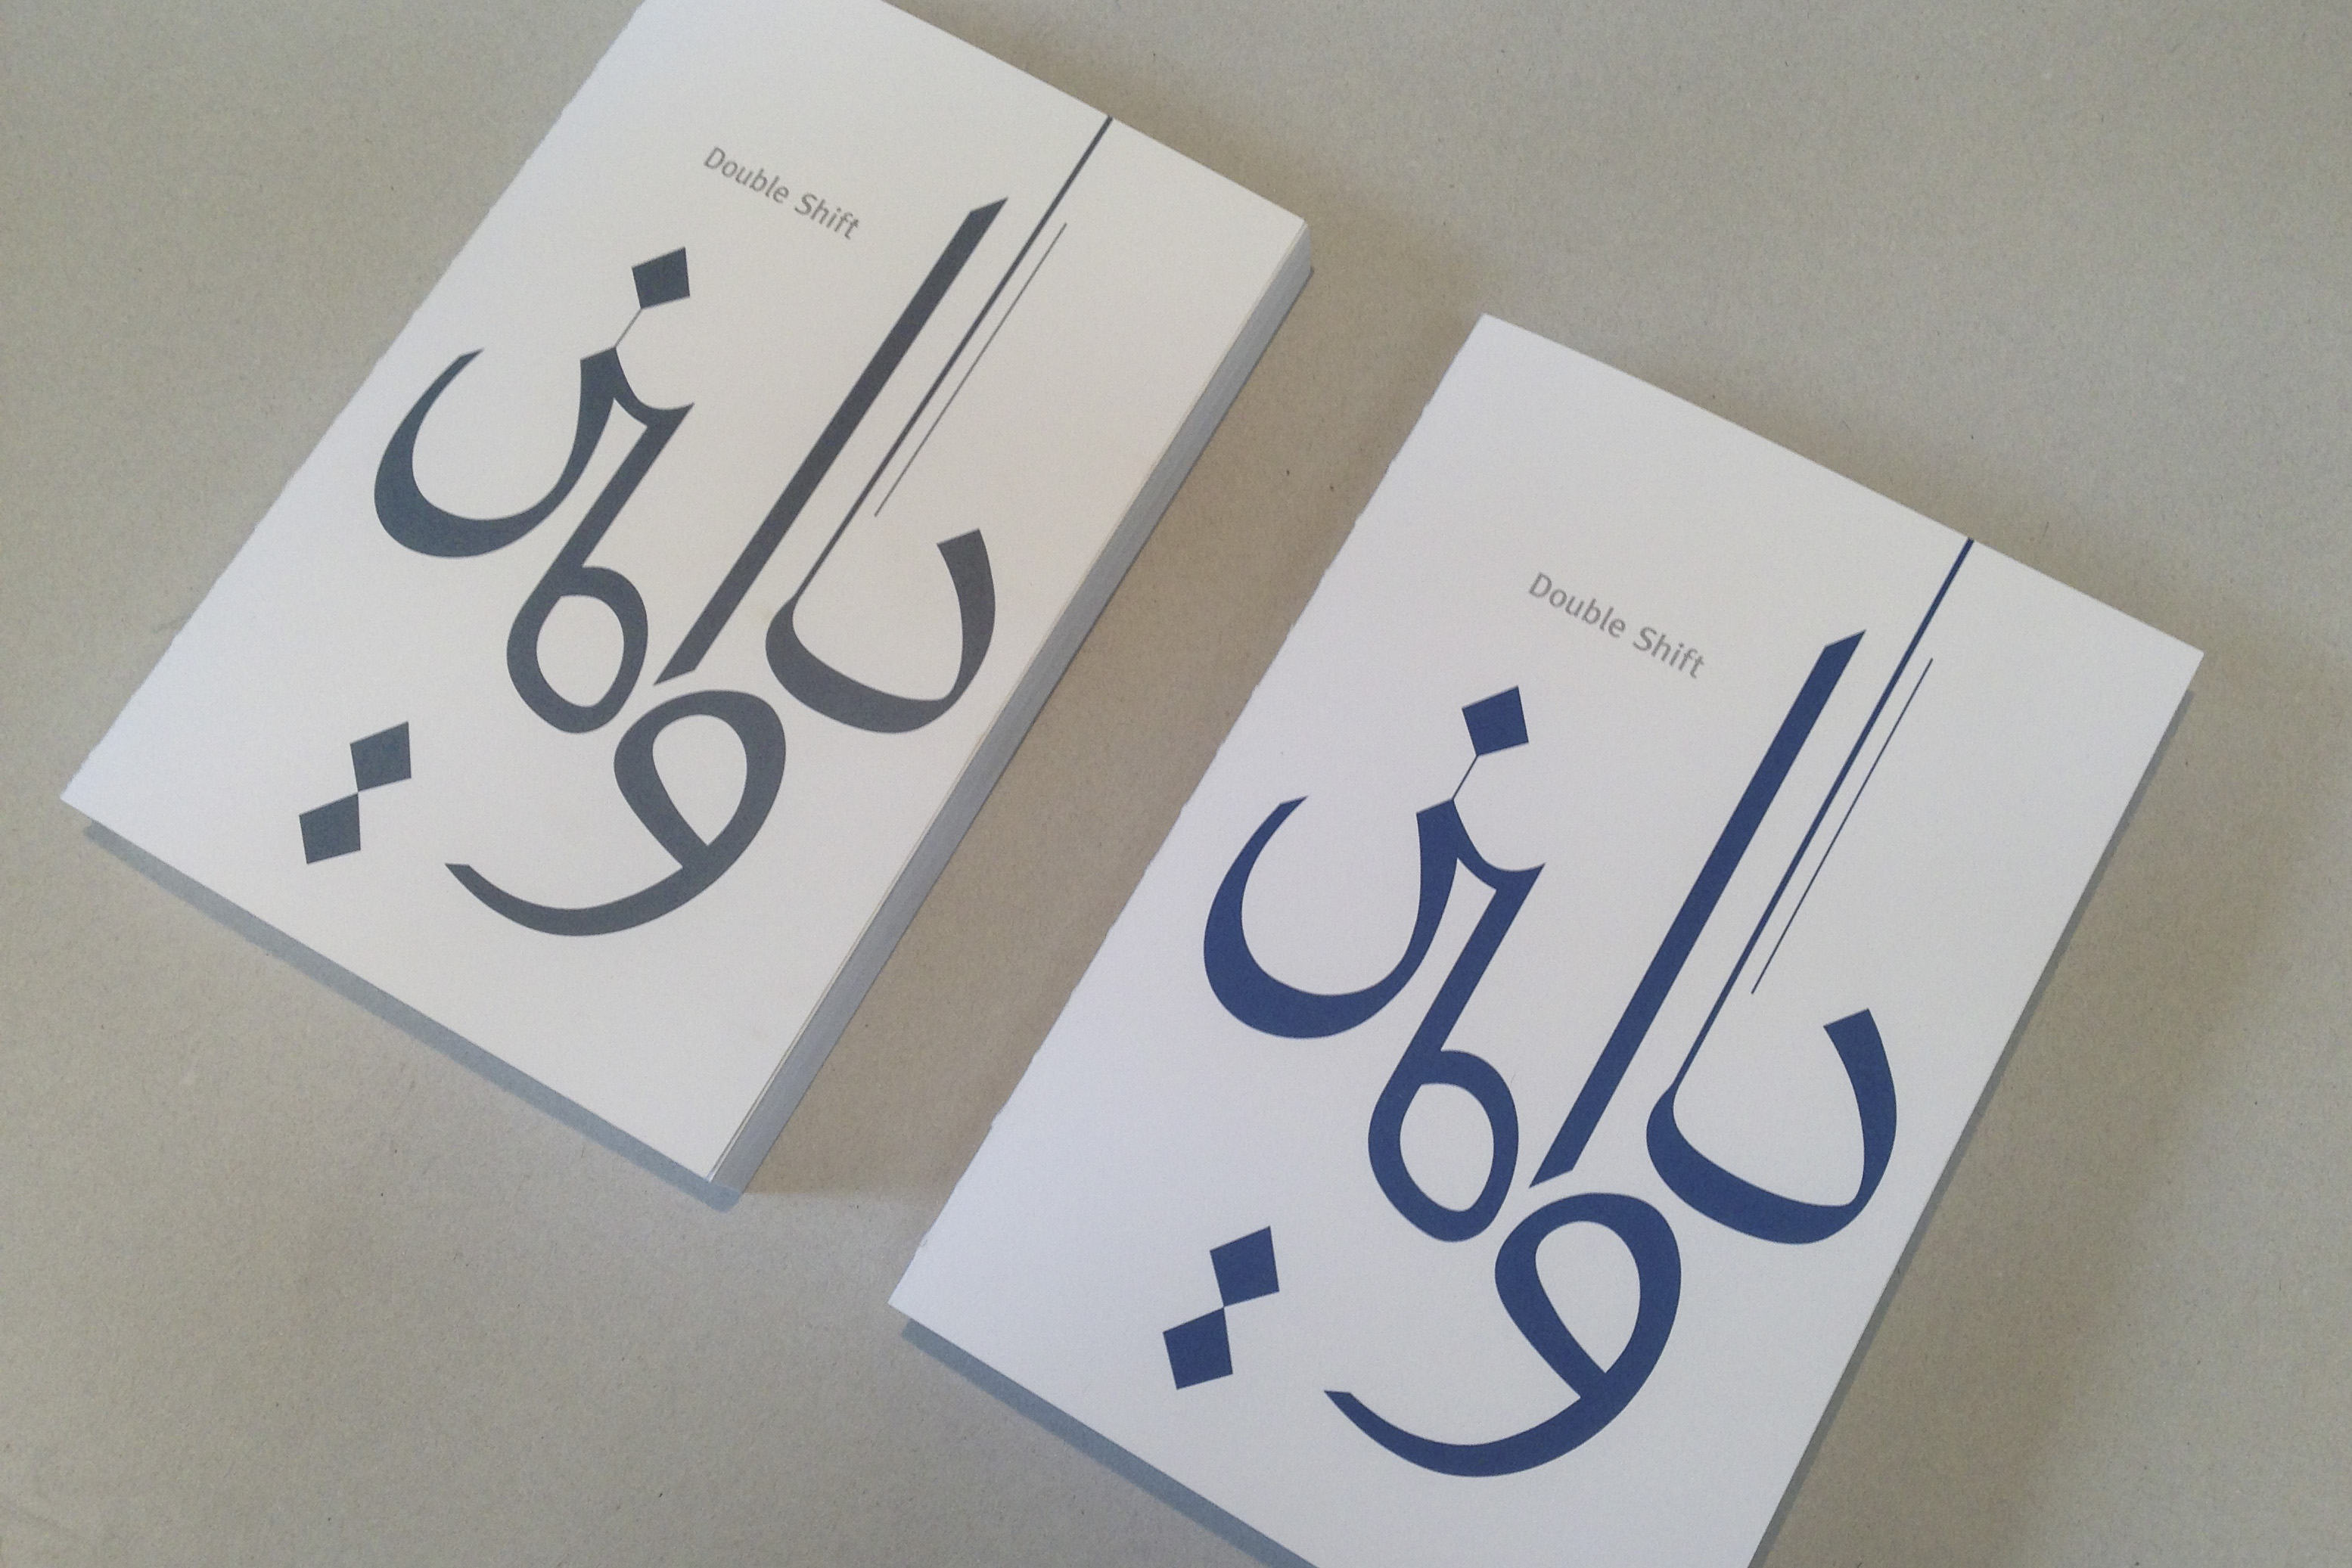 The project report was published in German and English as a limited edition. The Double Shift logo is printed on the cover. It is inspired by the Arabic calligraphy and means “two shifts”. For the English version the Double Shift logo is in grey green, the logo of the German version is in blue.